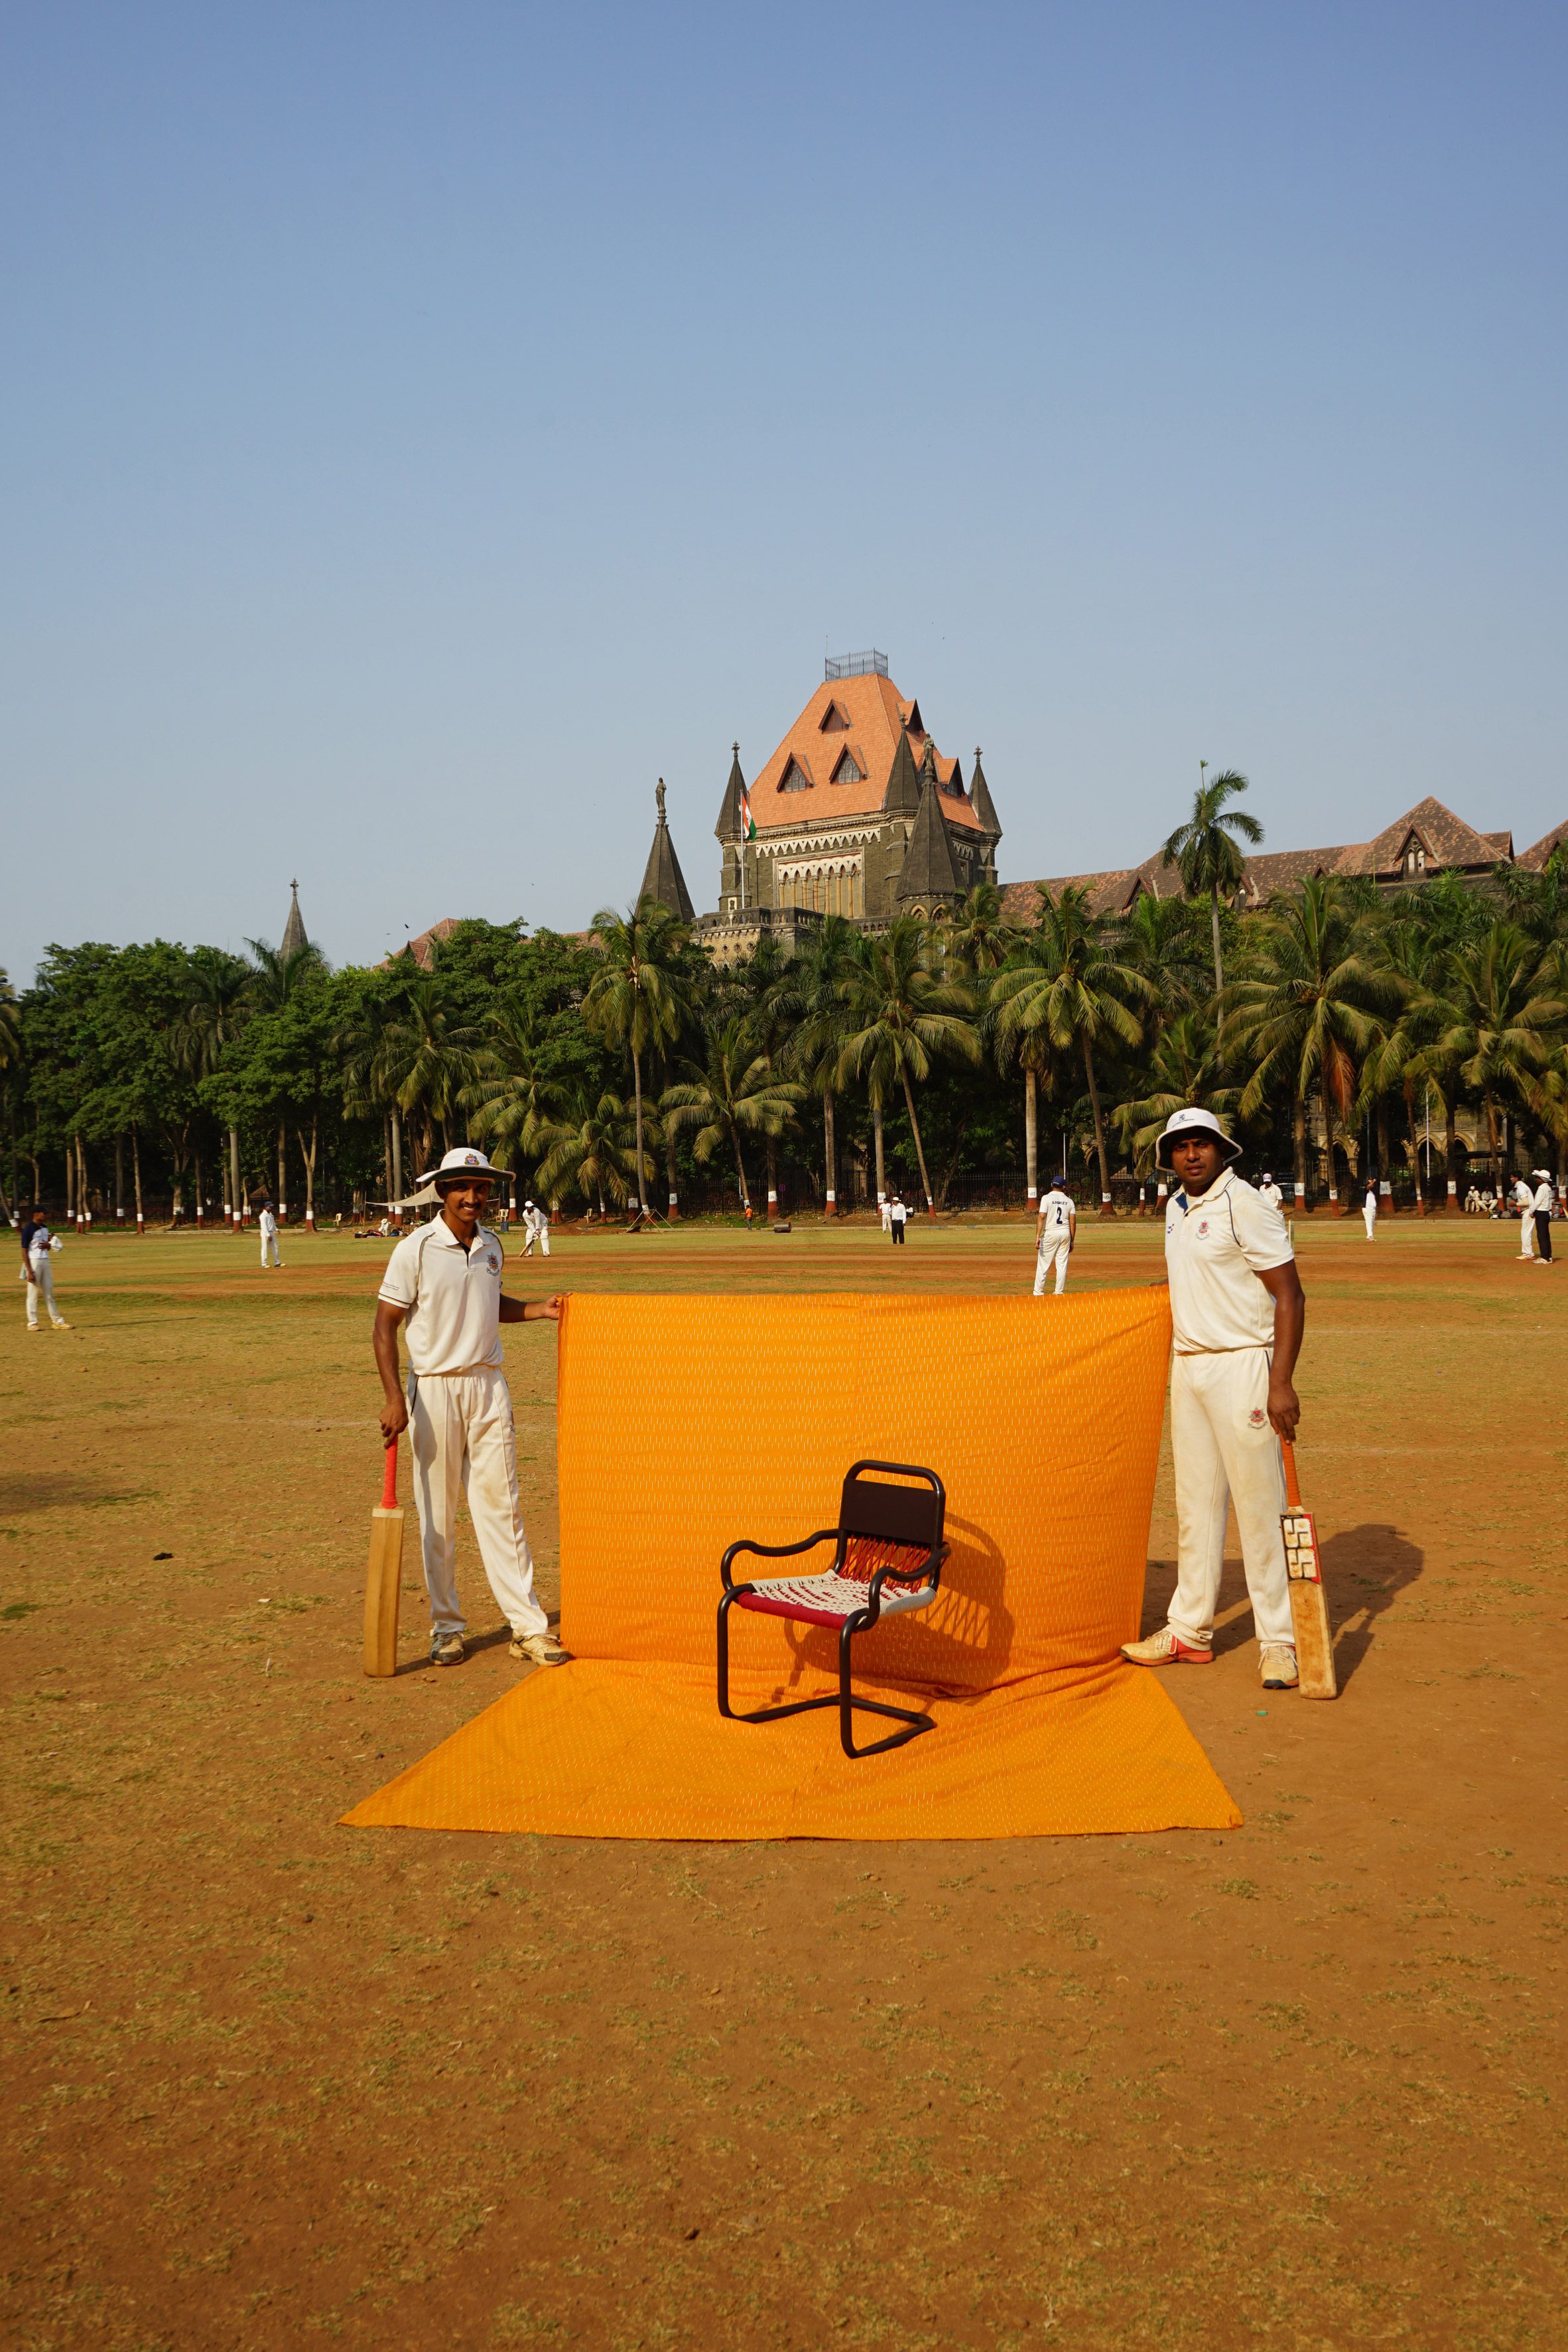 Chair photographed against a yellow sheet held by two cricketers on a cricket field in India